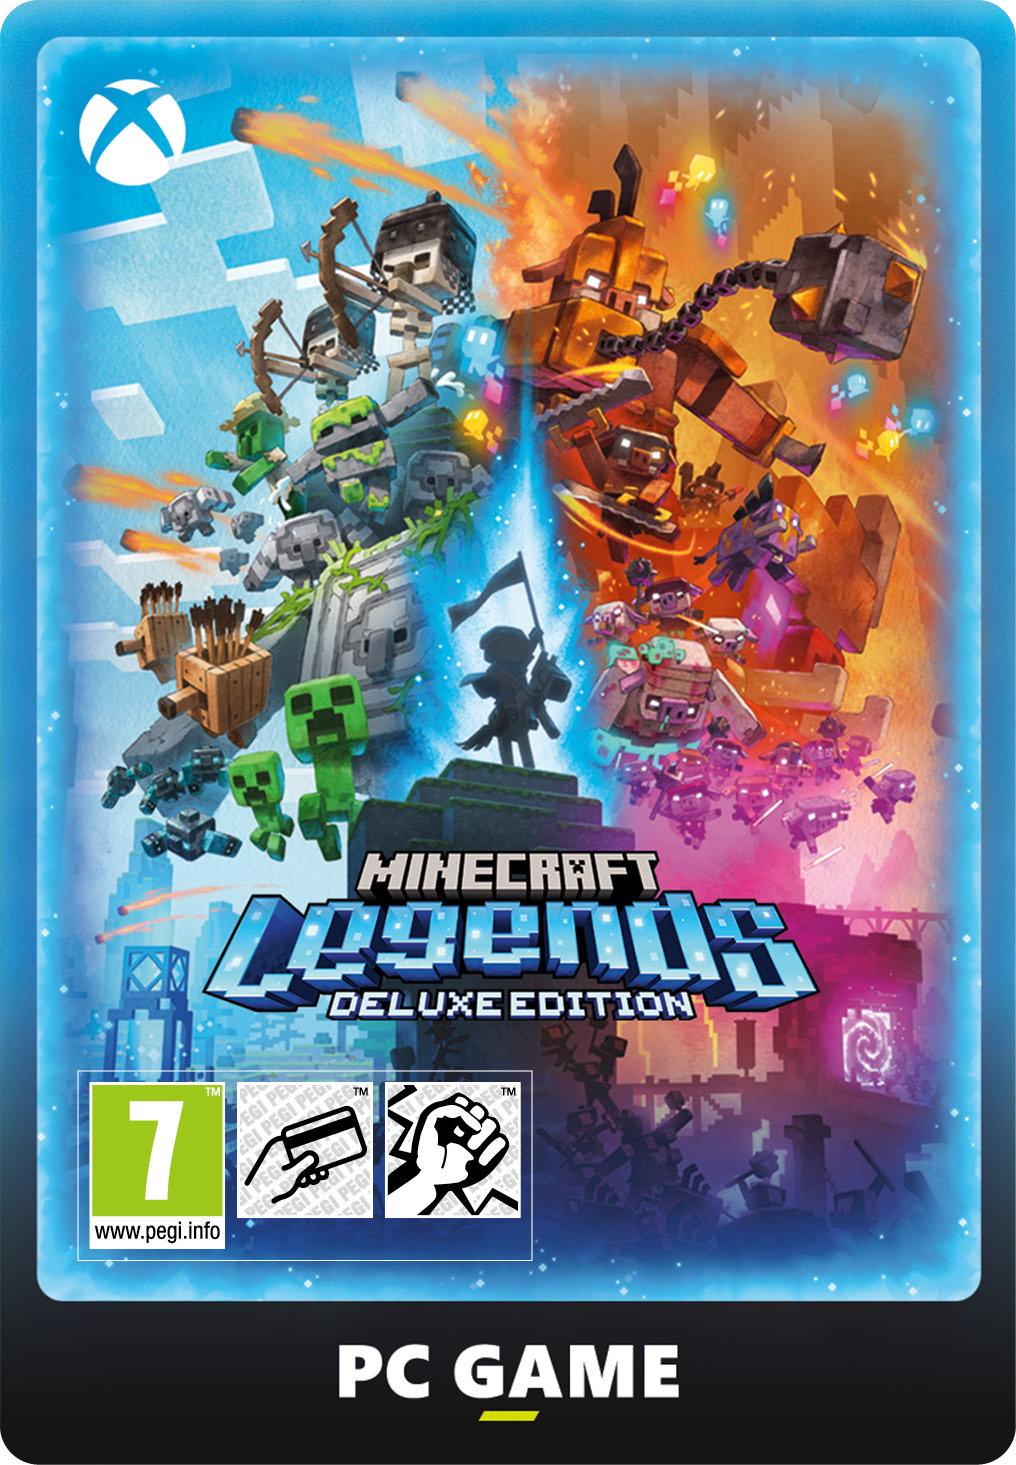 Minecraft Legends: Deluxe Edition - PC